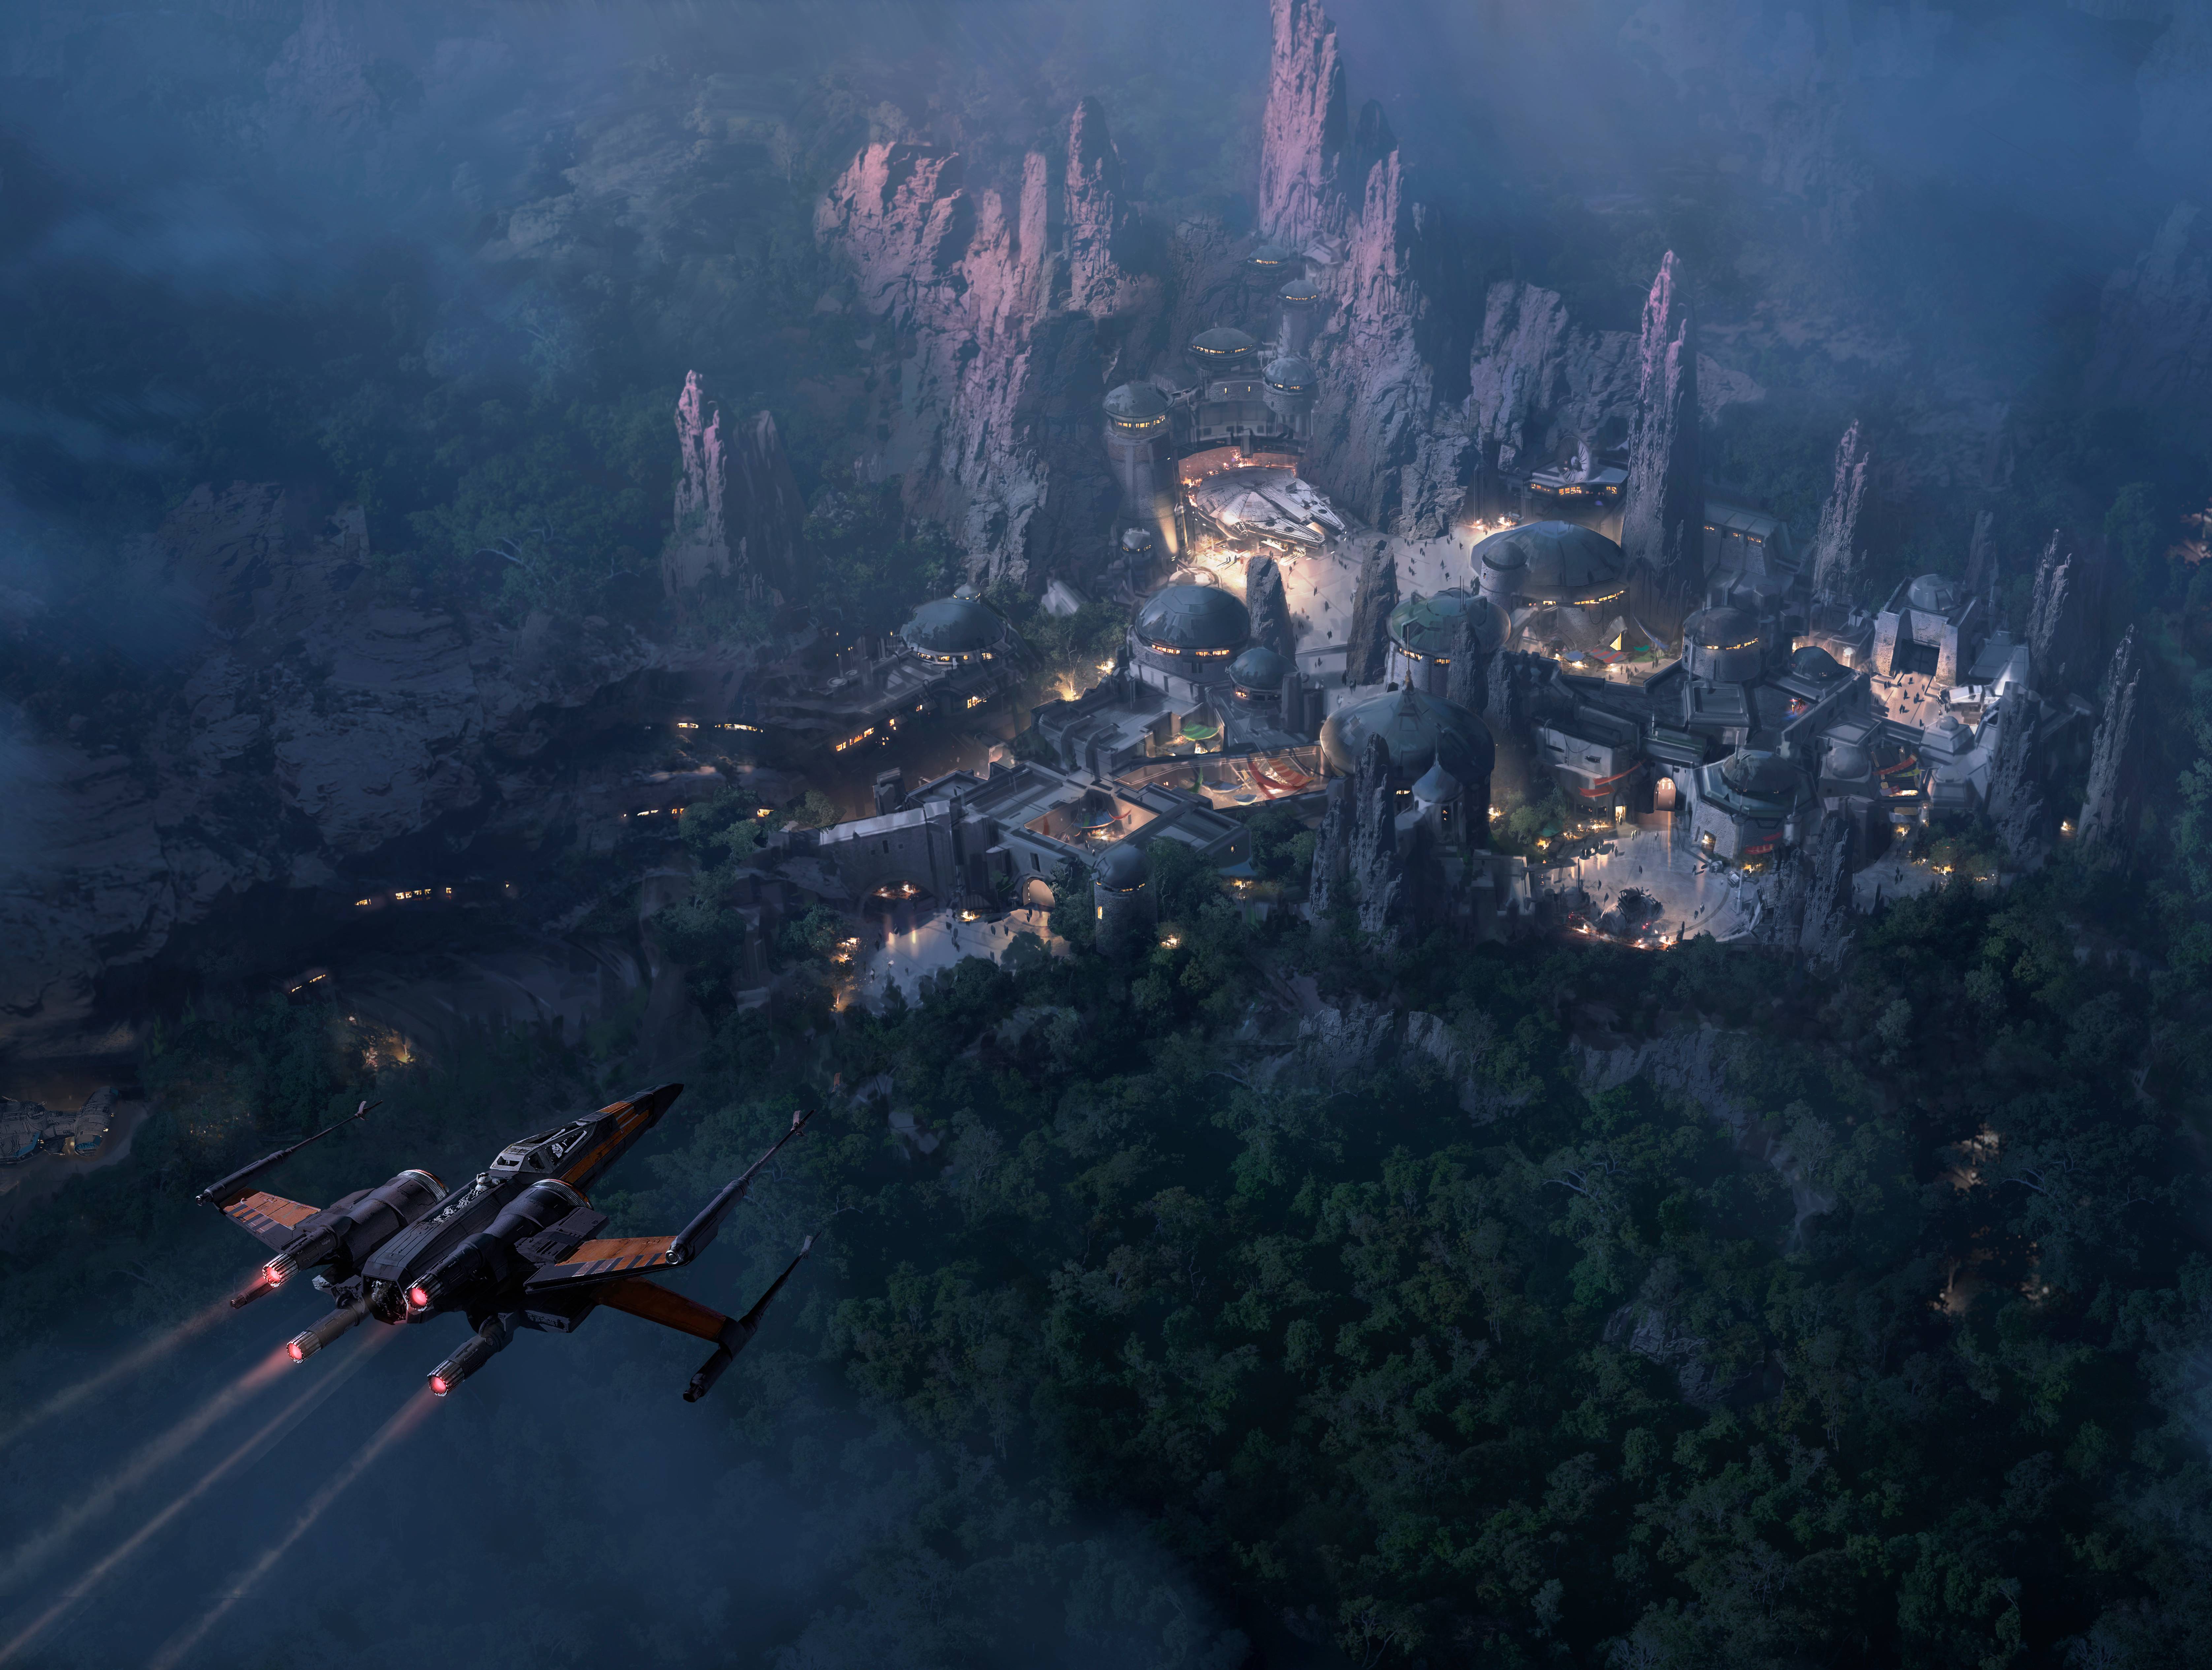 PHOTO - New concept art for Star Wars Land at Disney's Hollywood Studios